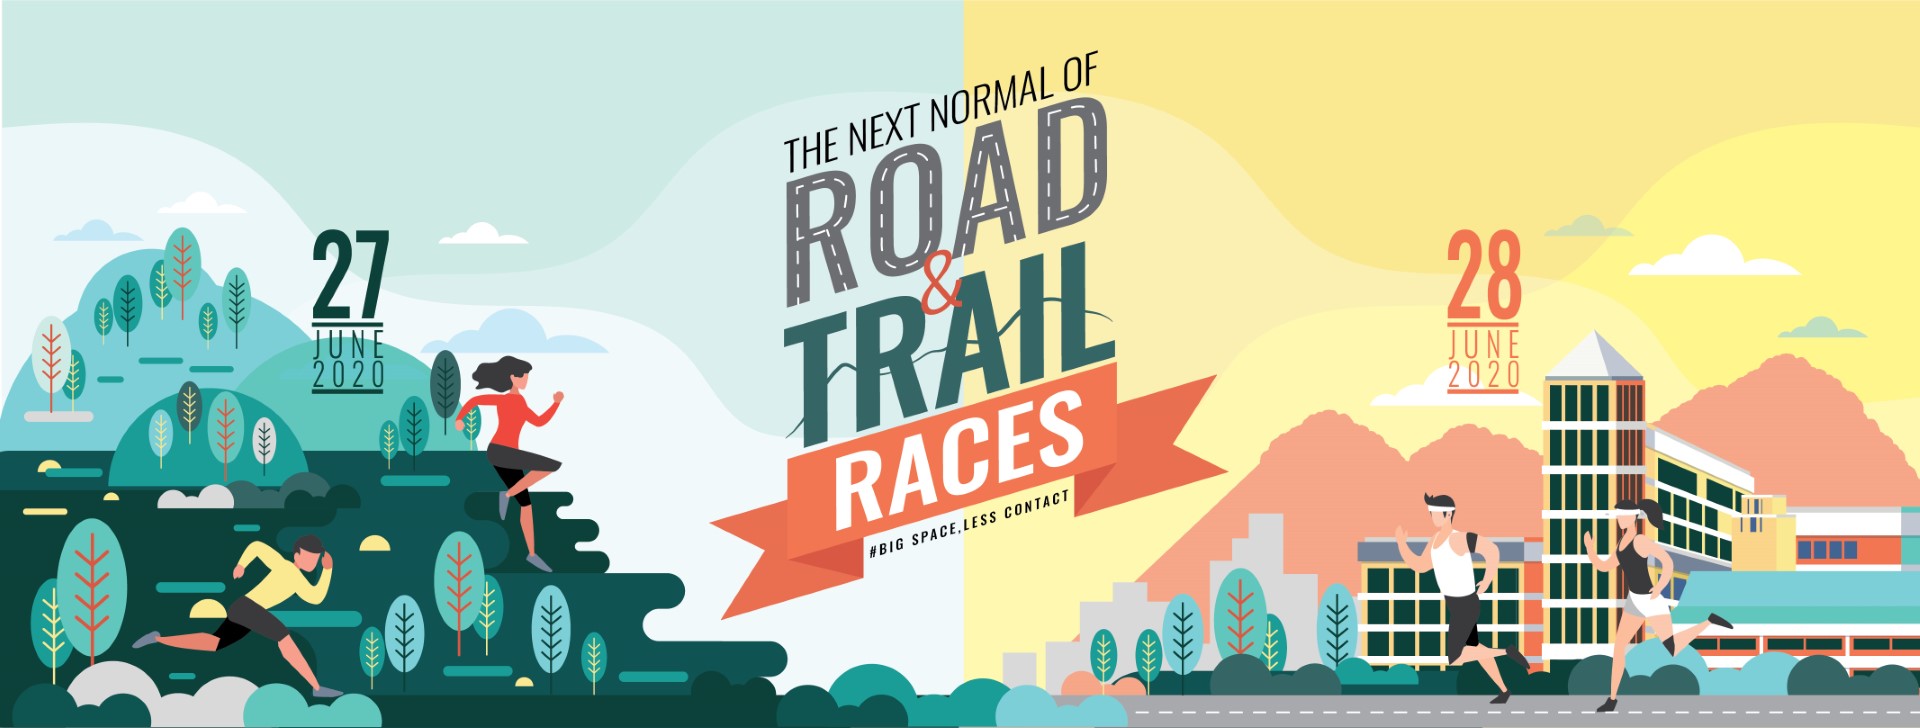 The Next Normal of Road & Trail Races 2020